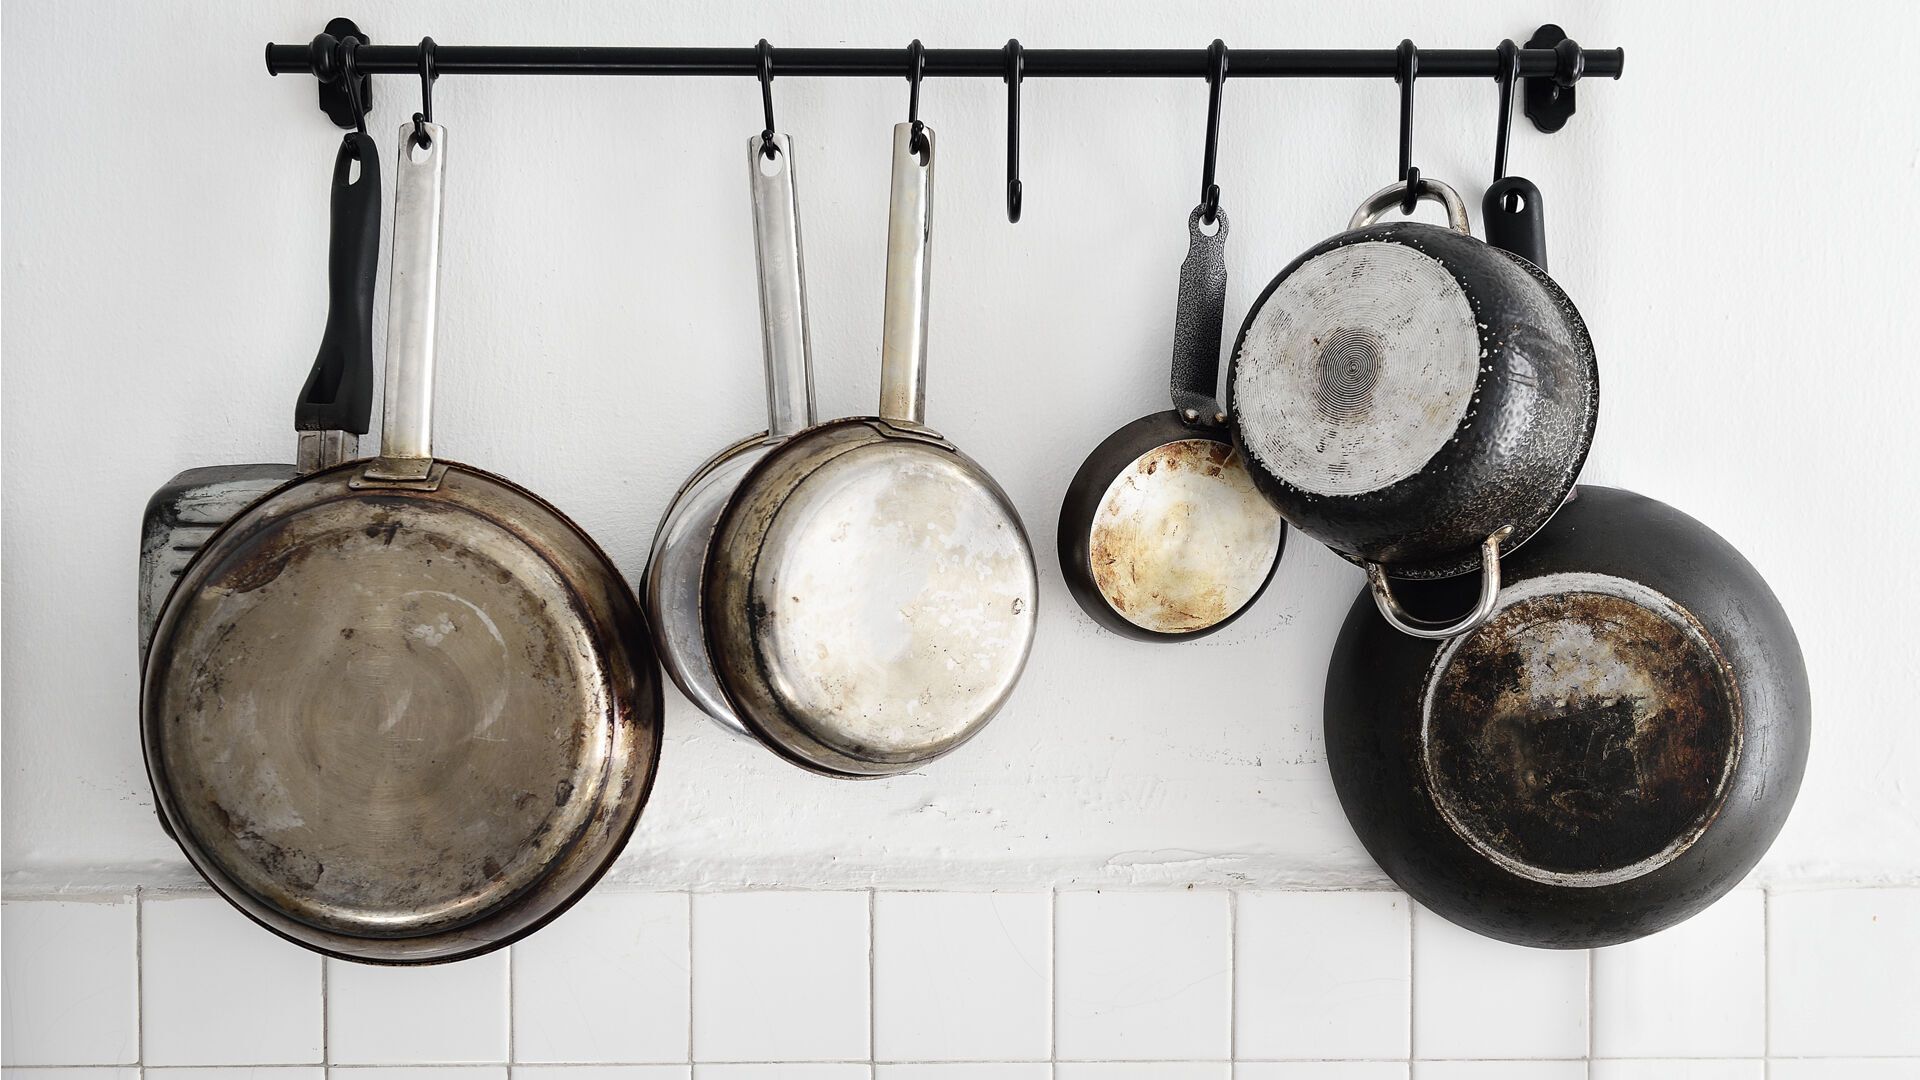 Do not damage the non-stick coating on the pan: what do you need to do with the cookware before cooking